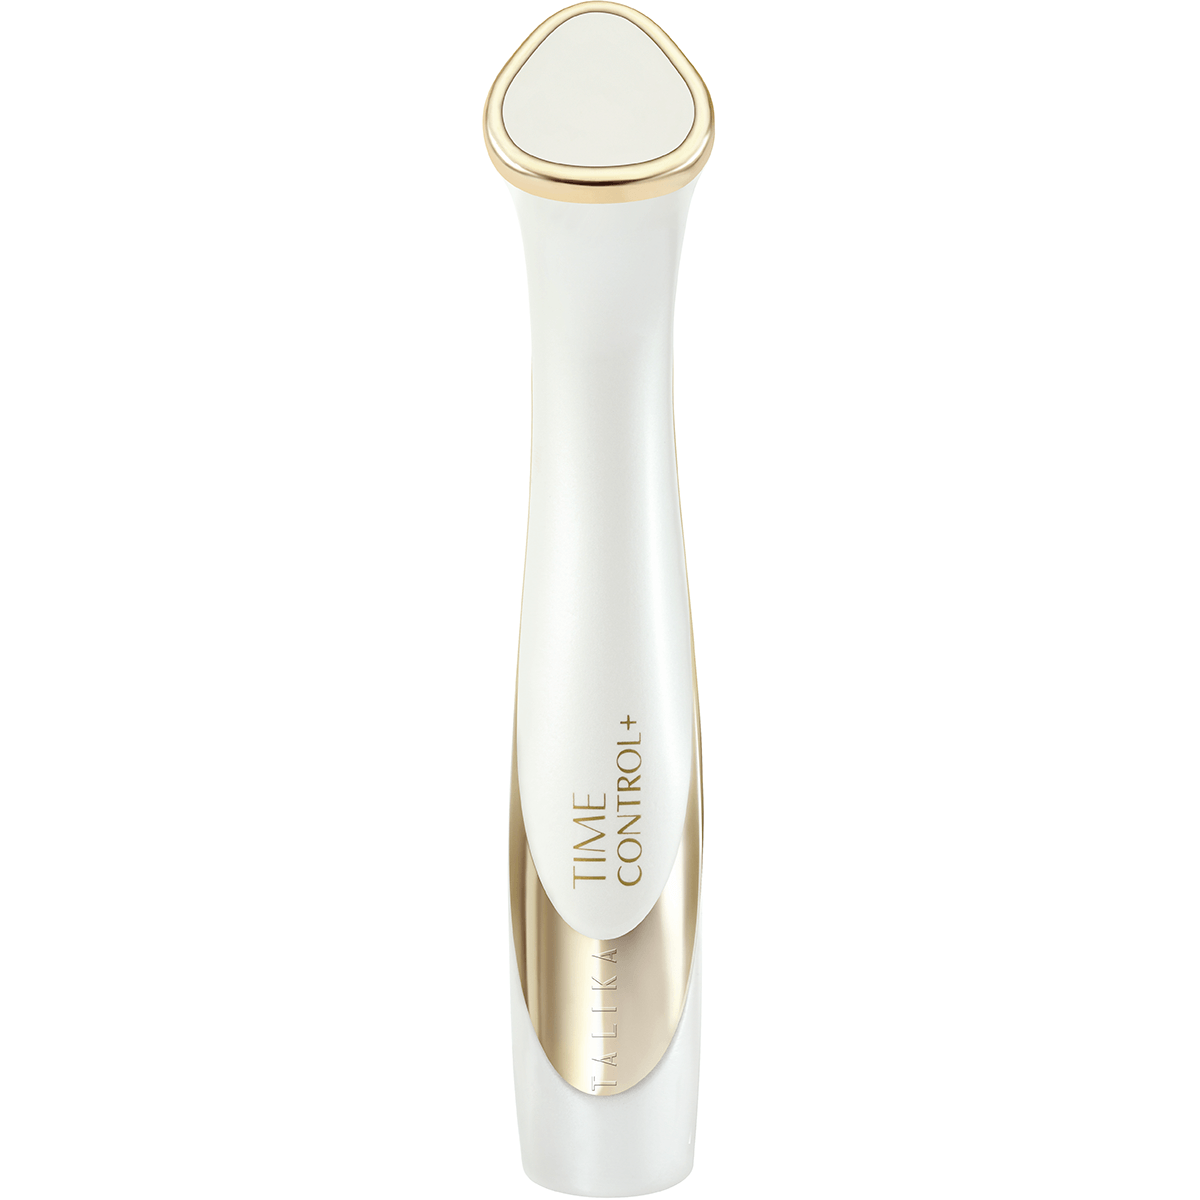 Talika Time Control+: Discover the First Eye Contour Anti-Ageing Devic –  CurrentBody US